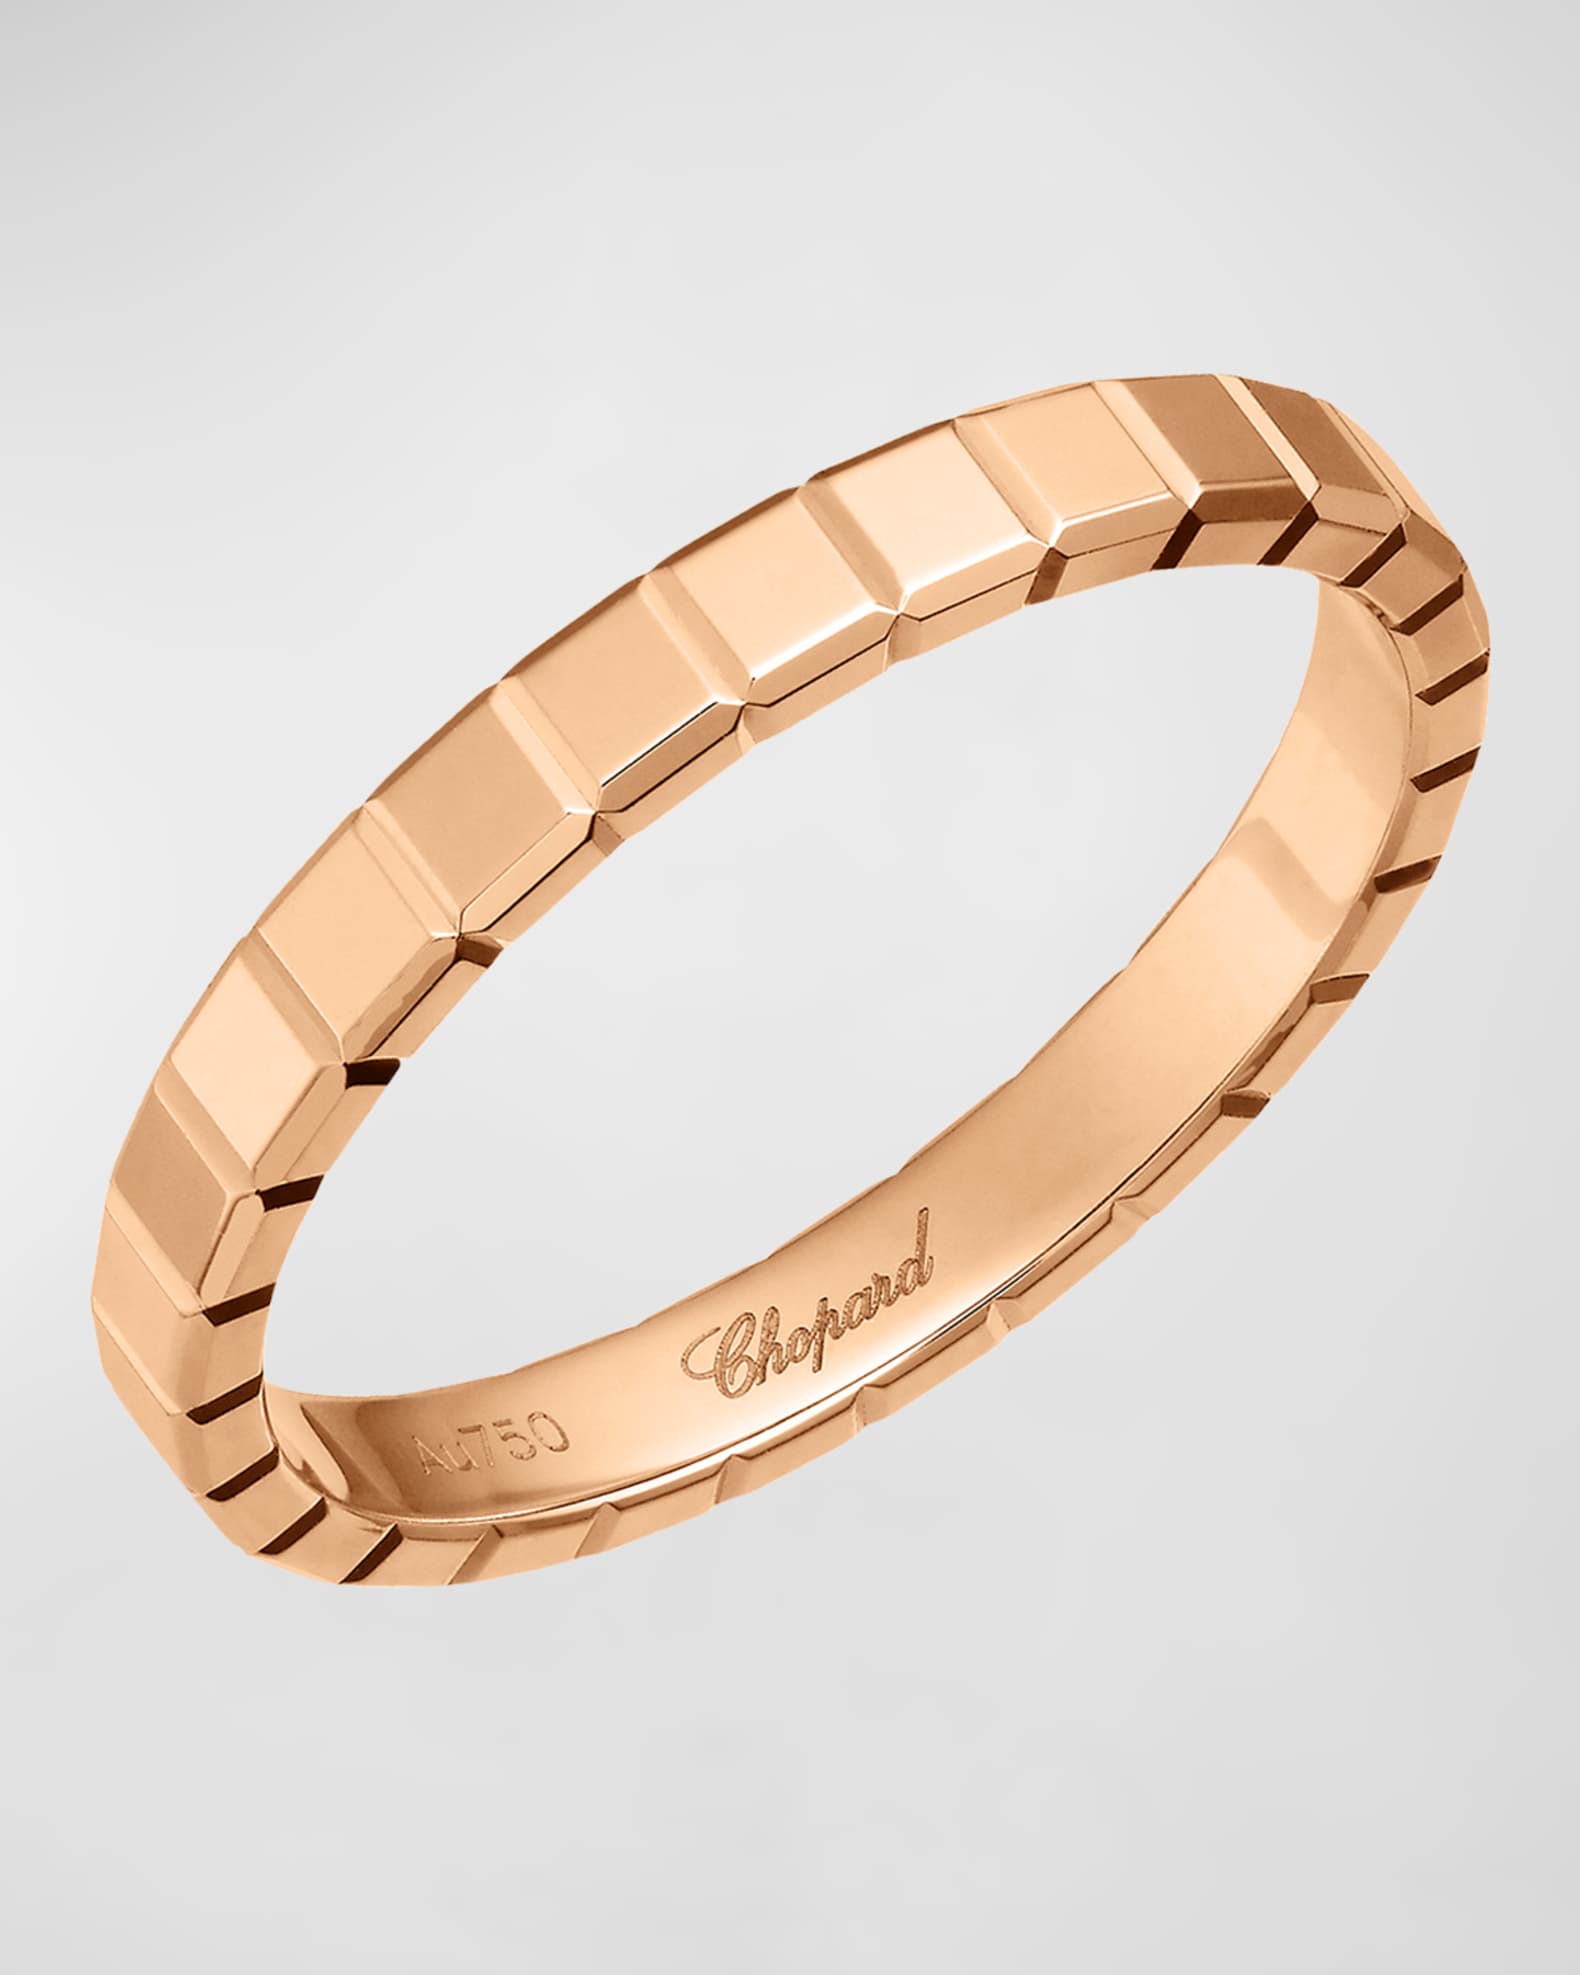 Chopard 18kt rose gold Ice Cube ring - Fairmined Rose Gold